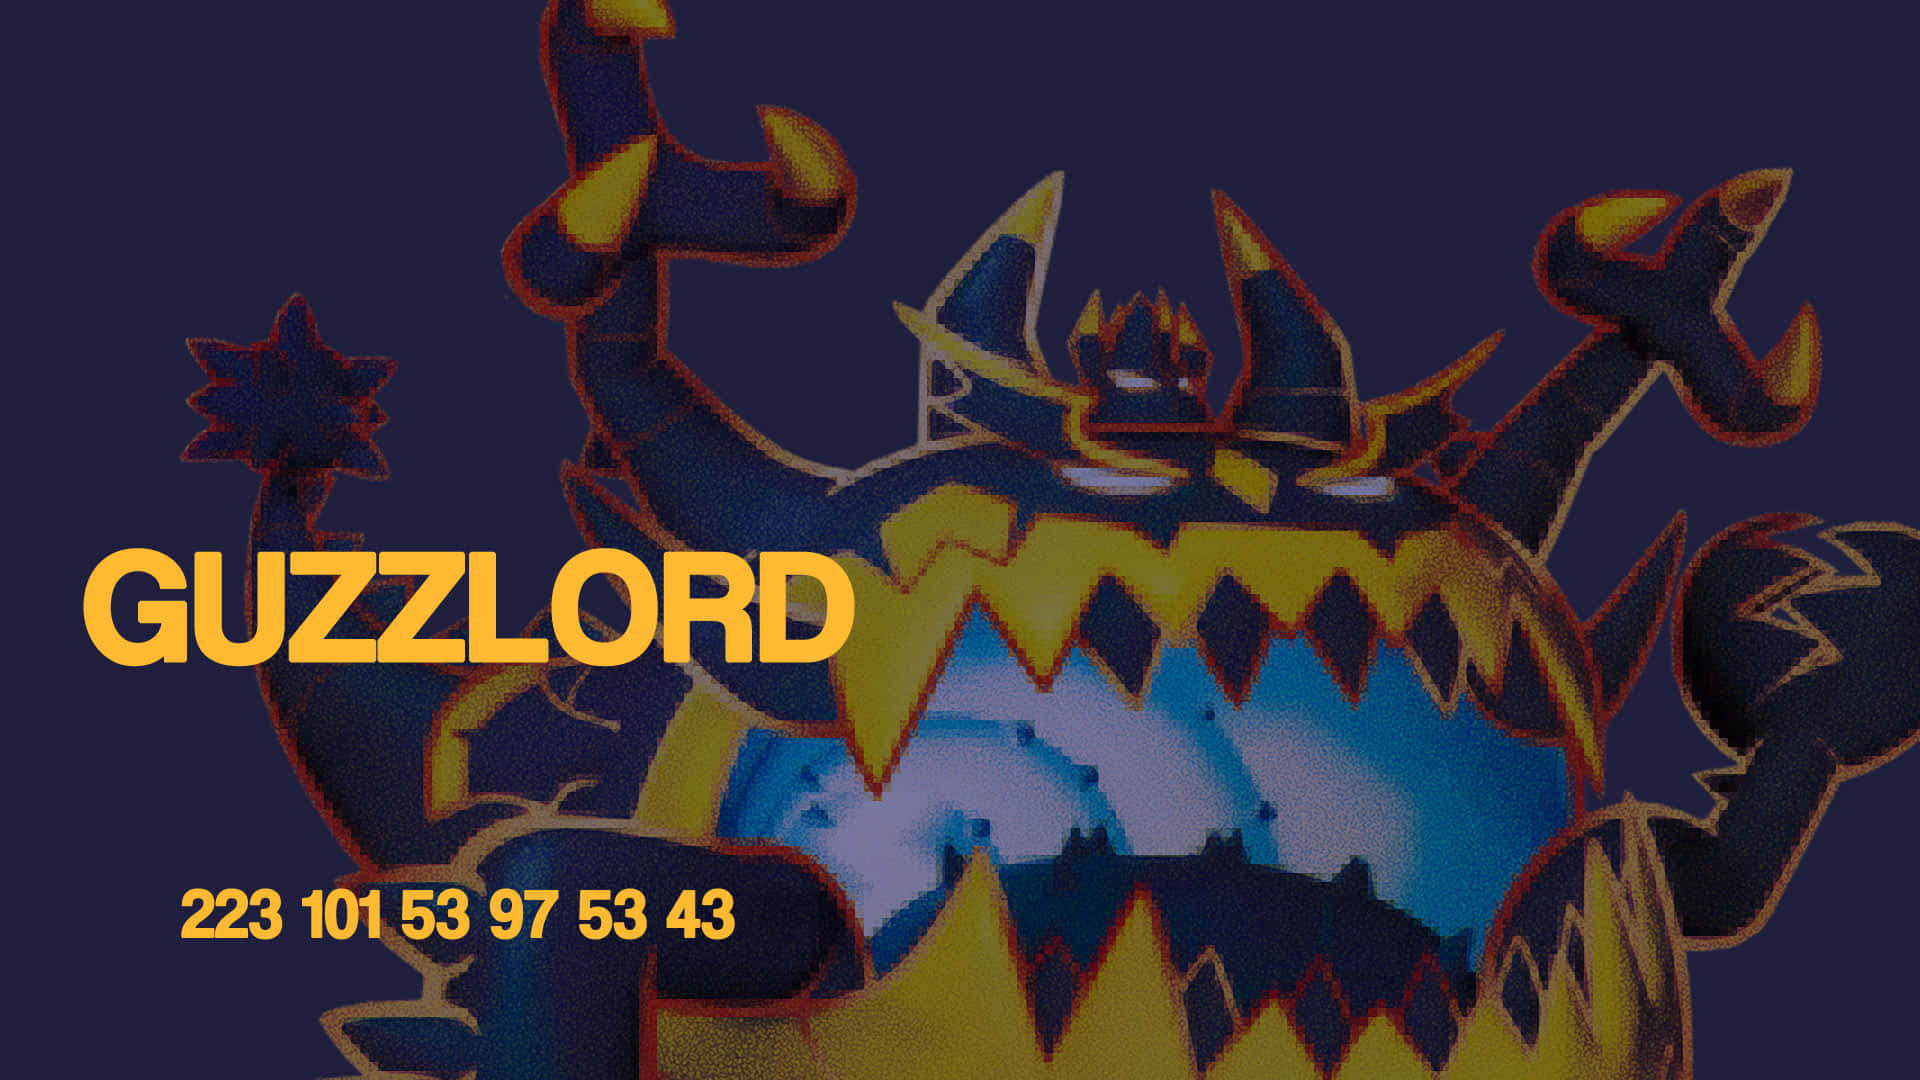 Mighty Guzzlord with its Powerful Stat Numbers Wallpaper